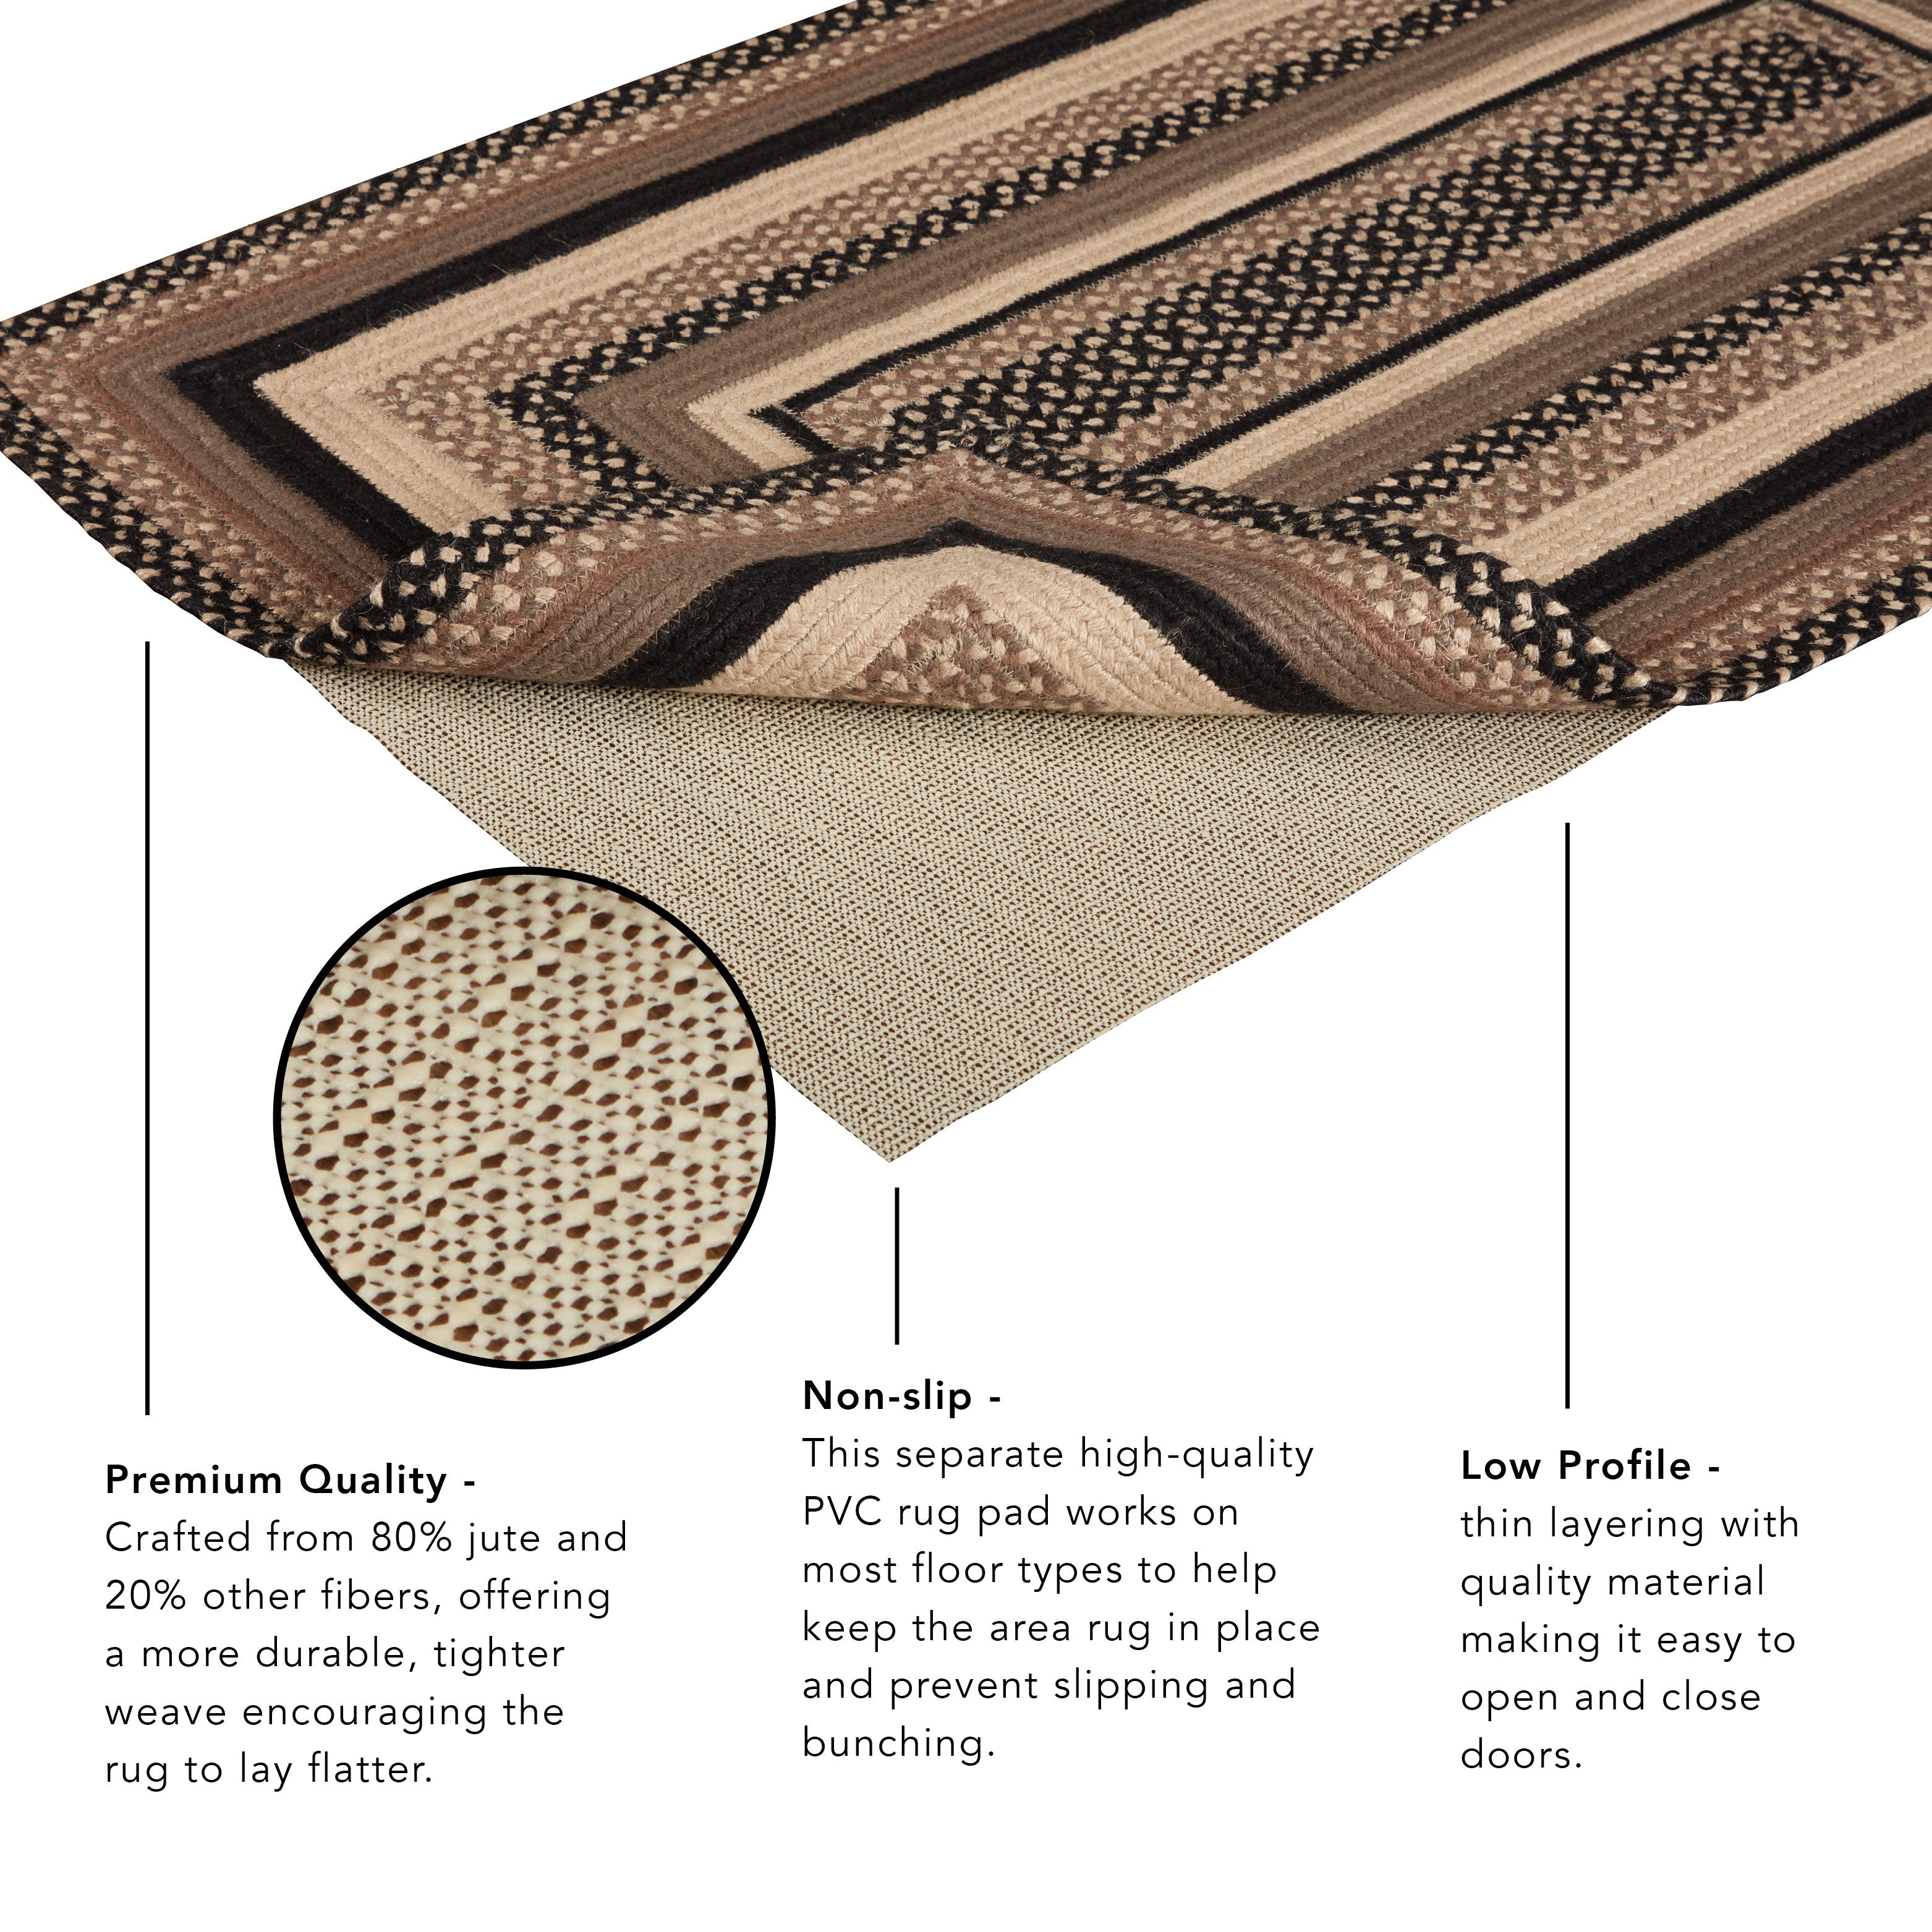 Beckham Jute Braided Rug Rect with Rug Pad 4'x6' VHC Brands